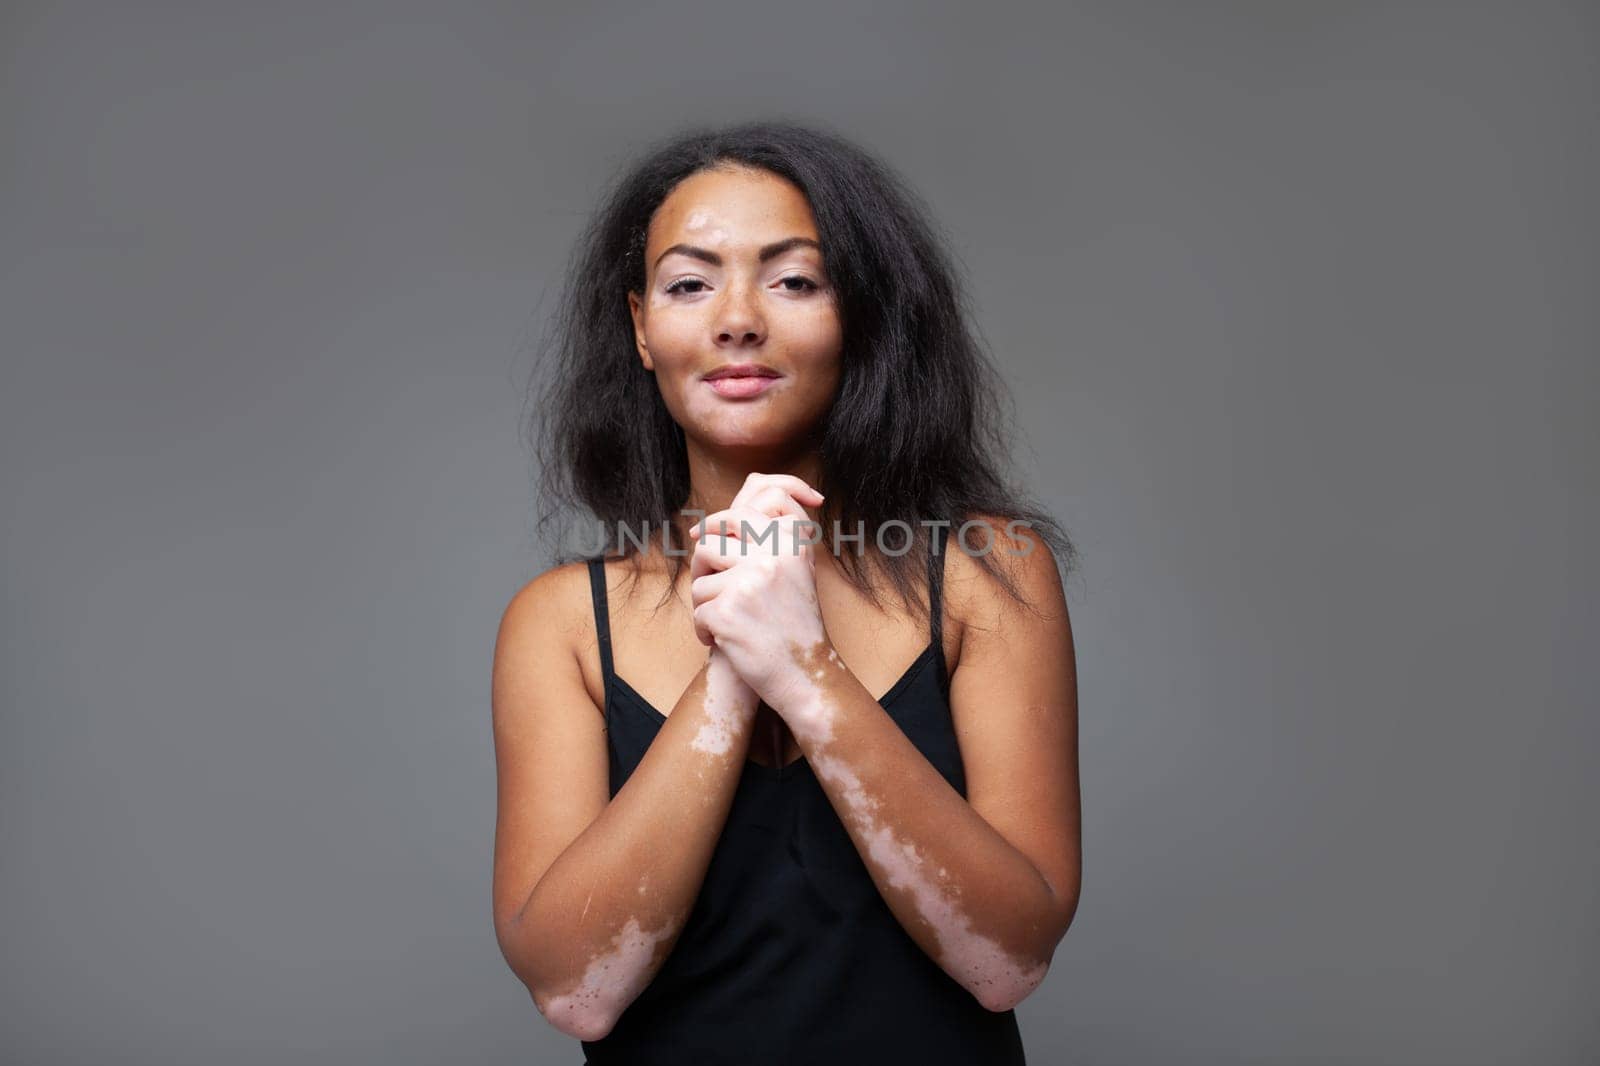 Beautiful happy African woman with Vitiligo disease looking at camera. Portrait of confident girl with hands clasped standing against gray background.